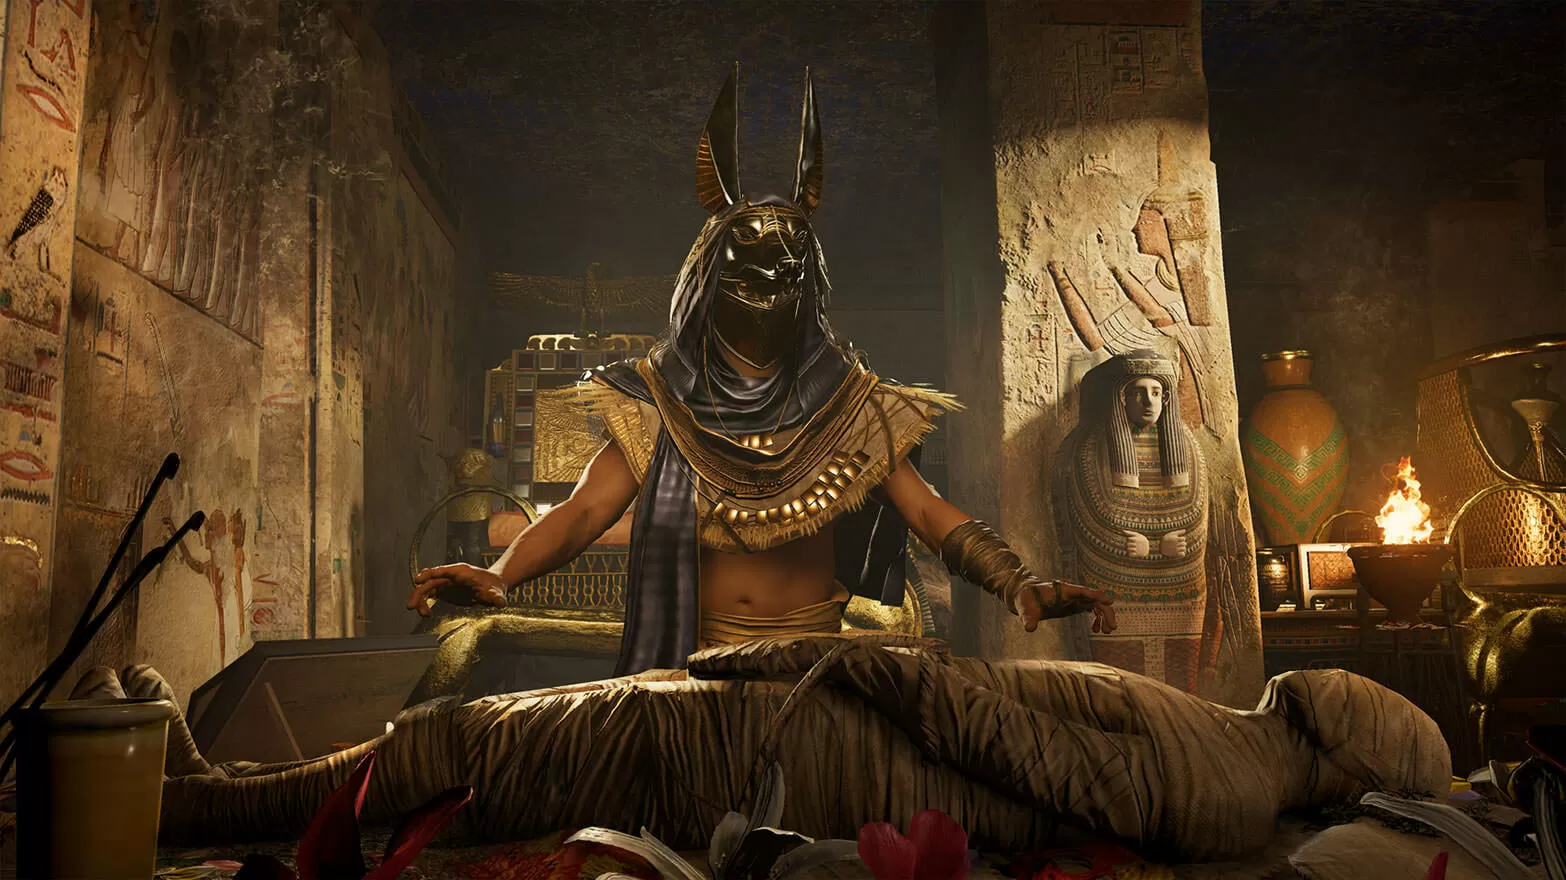 Second Assassin's Creed: Origins DLC Curse of the Pharaohs launched today